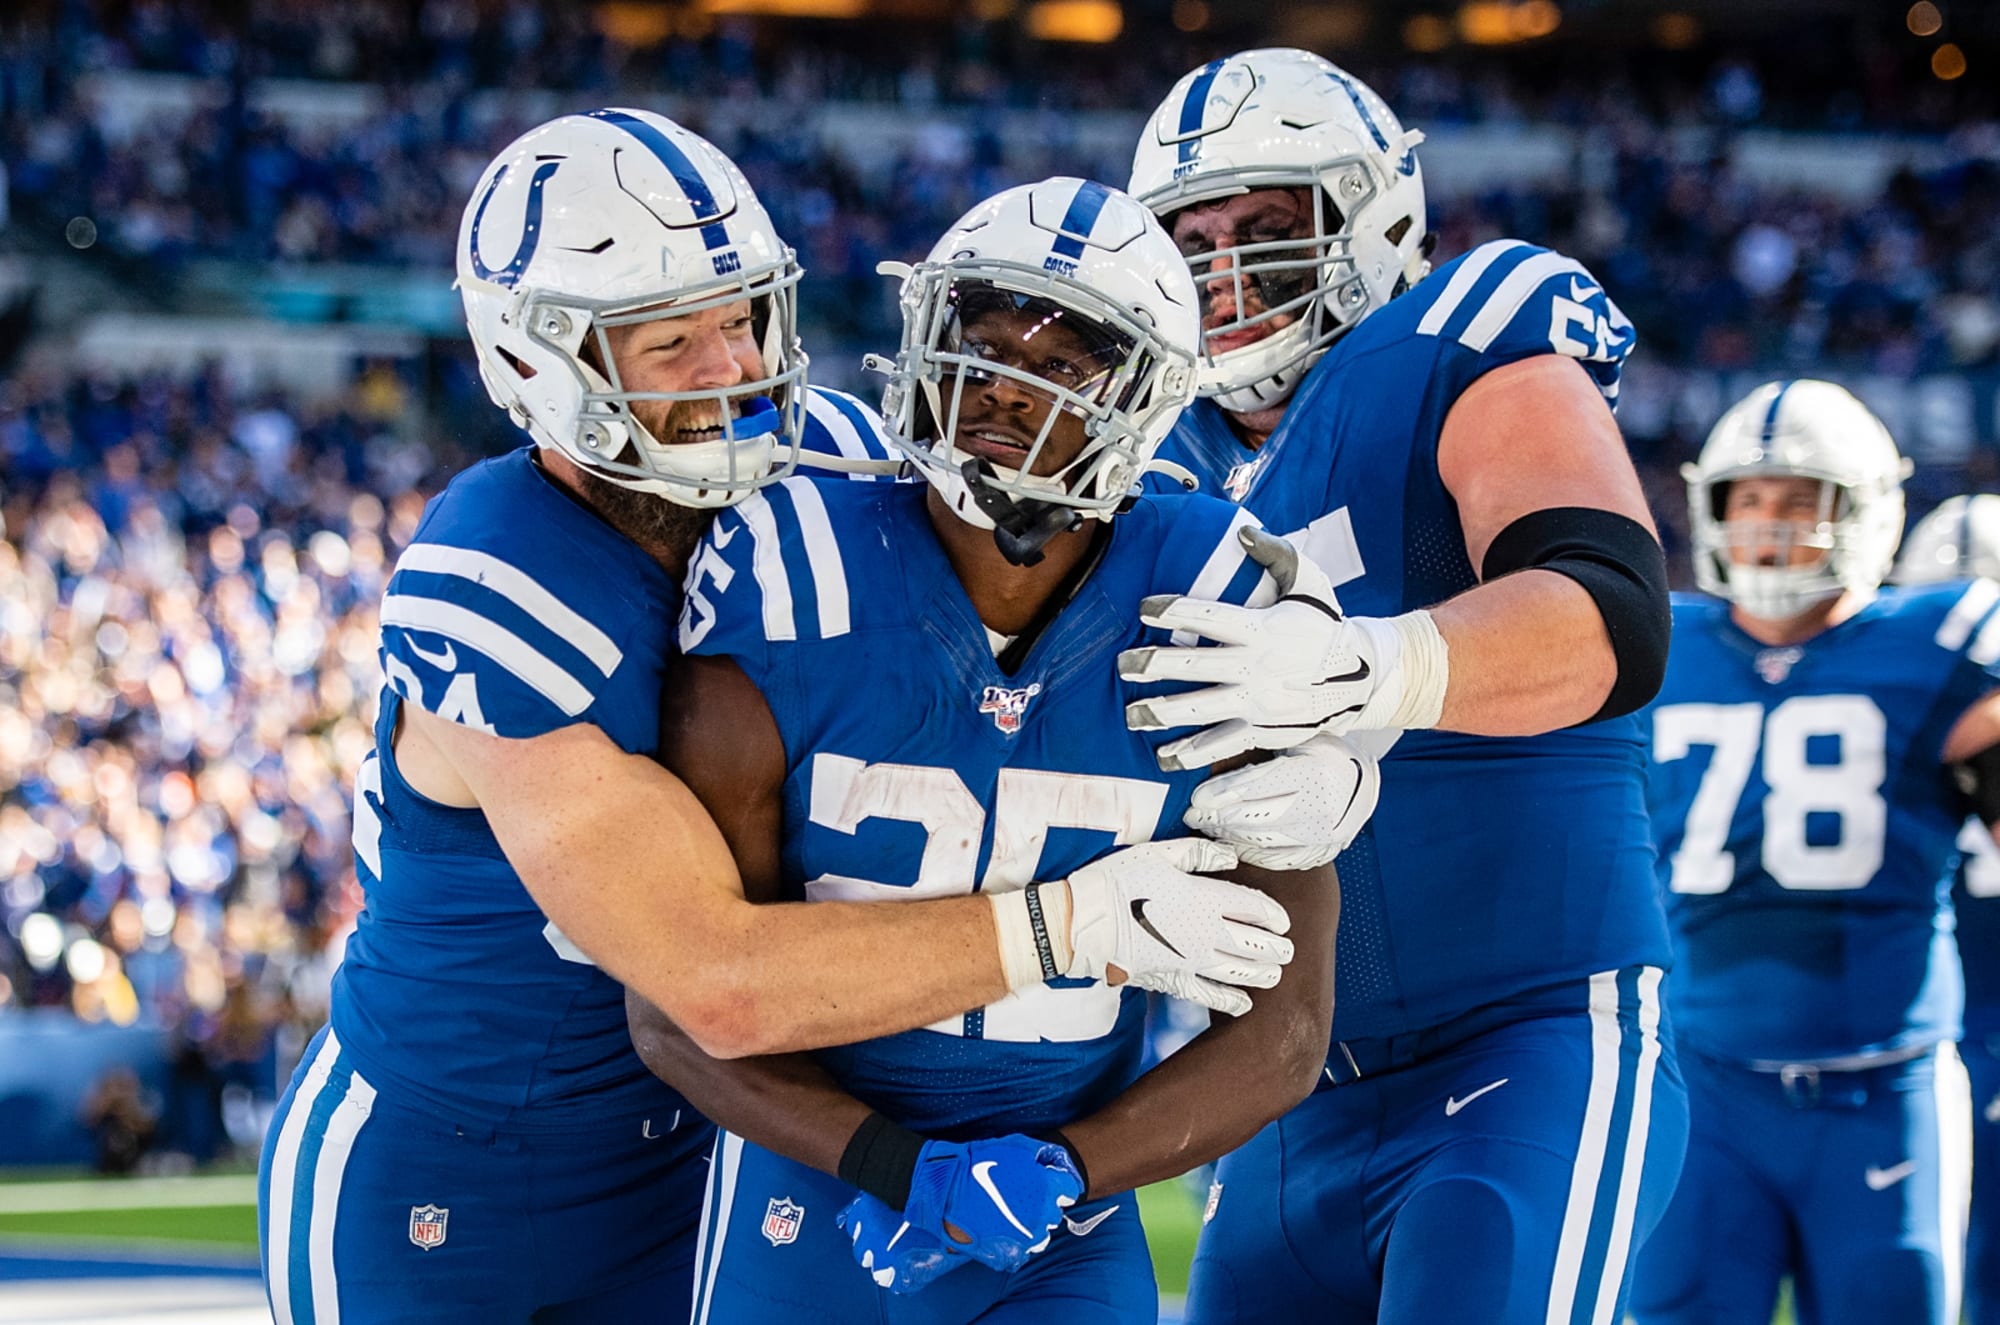 Colts Pro Bowlers representing the horseshoe in Orlando